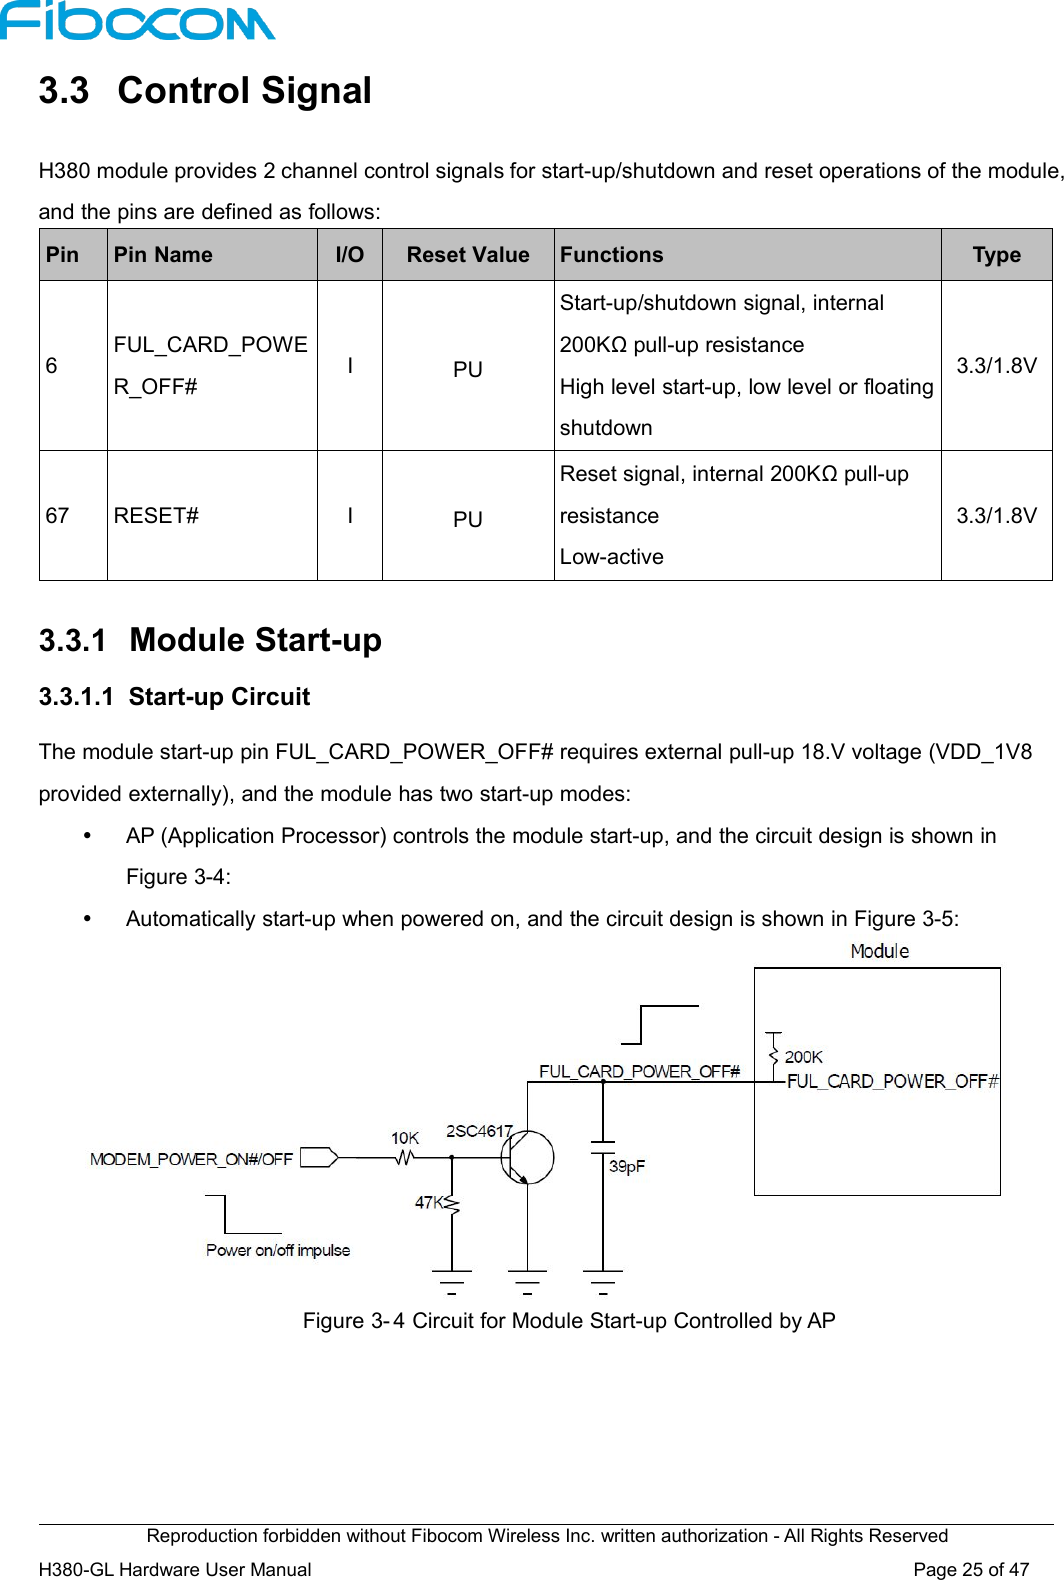 Reproduction forbidden without Fibocom Wireless Inc. written authorization - All Rights ReservedH380-GL Hardware User Manual Page25of473.3 Control SignalH380 module provides 2 channel control signals for start-up/shutdown and reset operations of the module,and the pins are defined as follows:PinPin NameI/OReset ValueFunctionsType6FUL_CARD_POWER_OFF#IPUStart-up/shutdown signal, internal200KΩ pull-up resistanceHigh level start-up, low level or floatingshutdown3.3/1.8V67RESET#IPUReset signal, internal 200KΩ pull-upresistanceLow-active3.3/1.8V3.3.1 Module Start-up3.3.1.1 Start-up CircuitThe module start-up pin FUL_CARD_POWER_OFF# requires external pull-up 18.V voltage (VDD_1V8provided externally), and the module has two start-up modes:AP (Application Processor) controls the module start-up, and the circuit design is shown inFigure 3-4:Automatically start-up when powered on, and the circuit design is shown in Figure 3-5:Figure 3- 4 Circuit for Module Start-up Controlled by AP